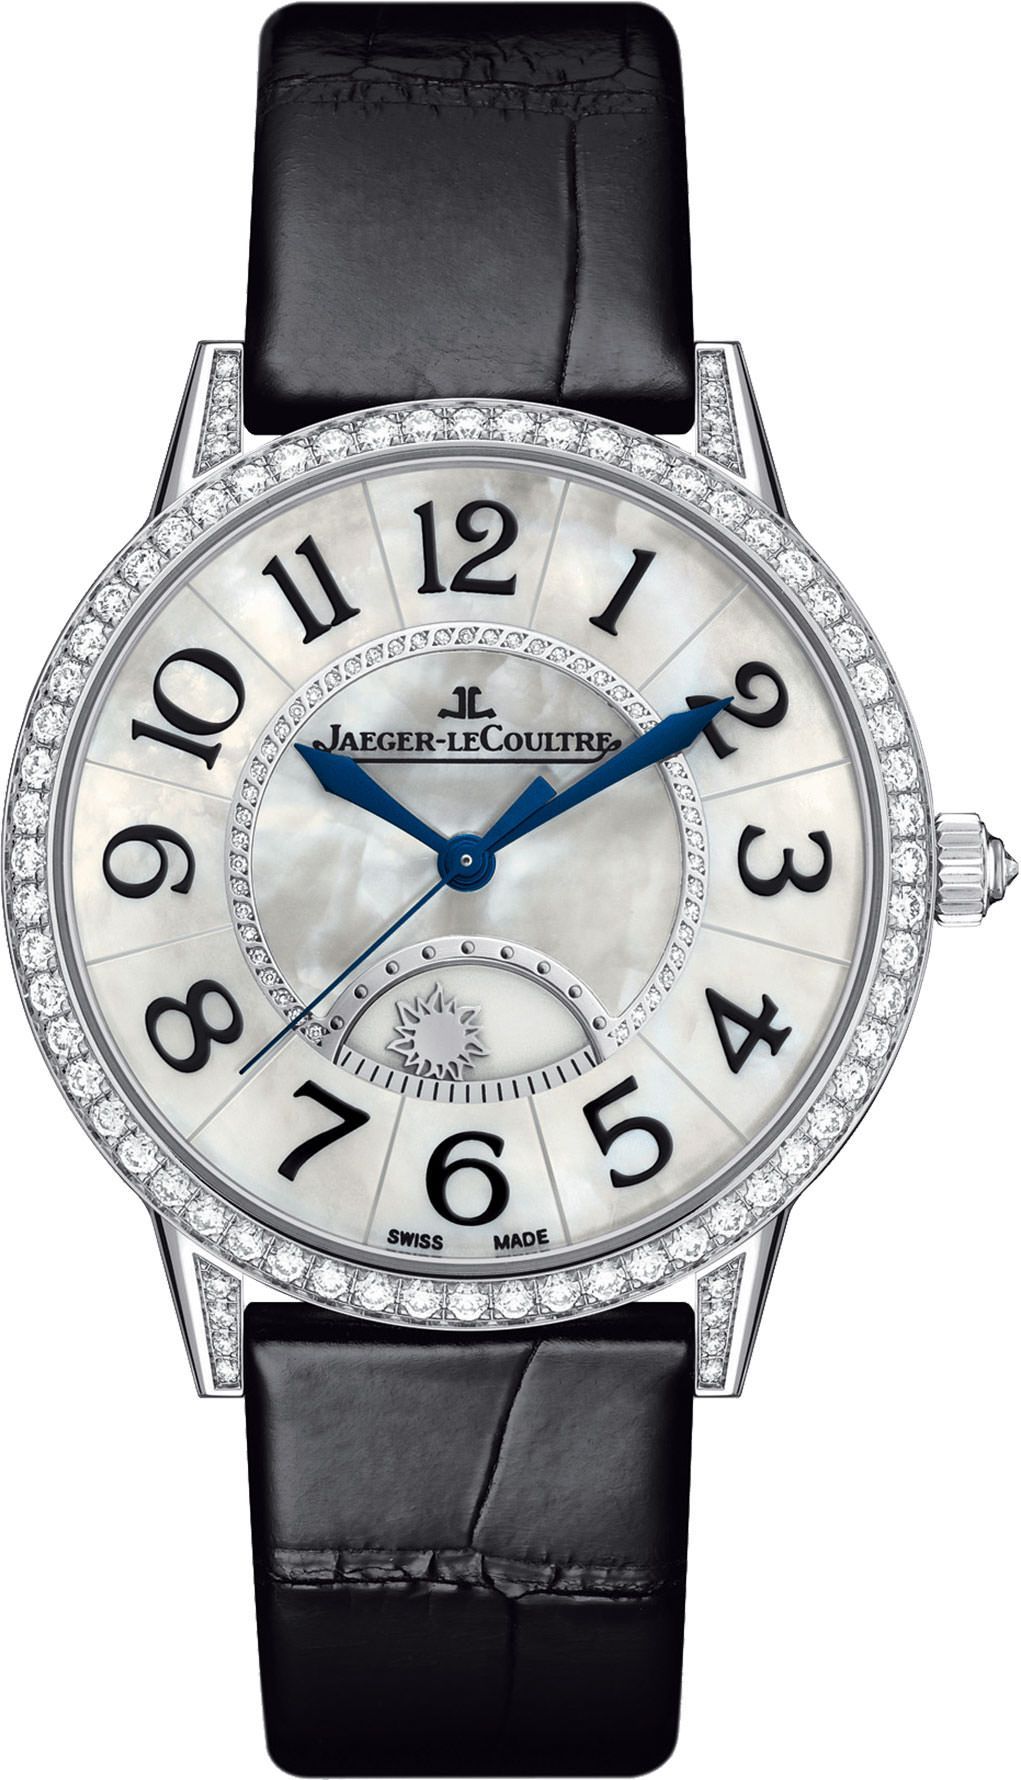 Jaeger-LeCoultre Rendez-Vous Night & Day MOP Dial 36 mm Automatic Watch For Women - 1